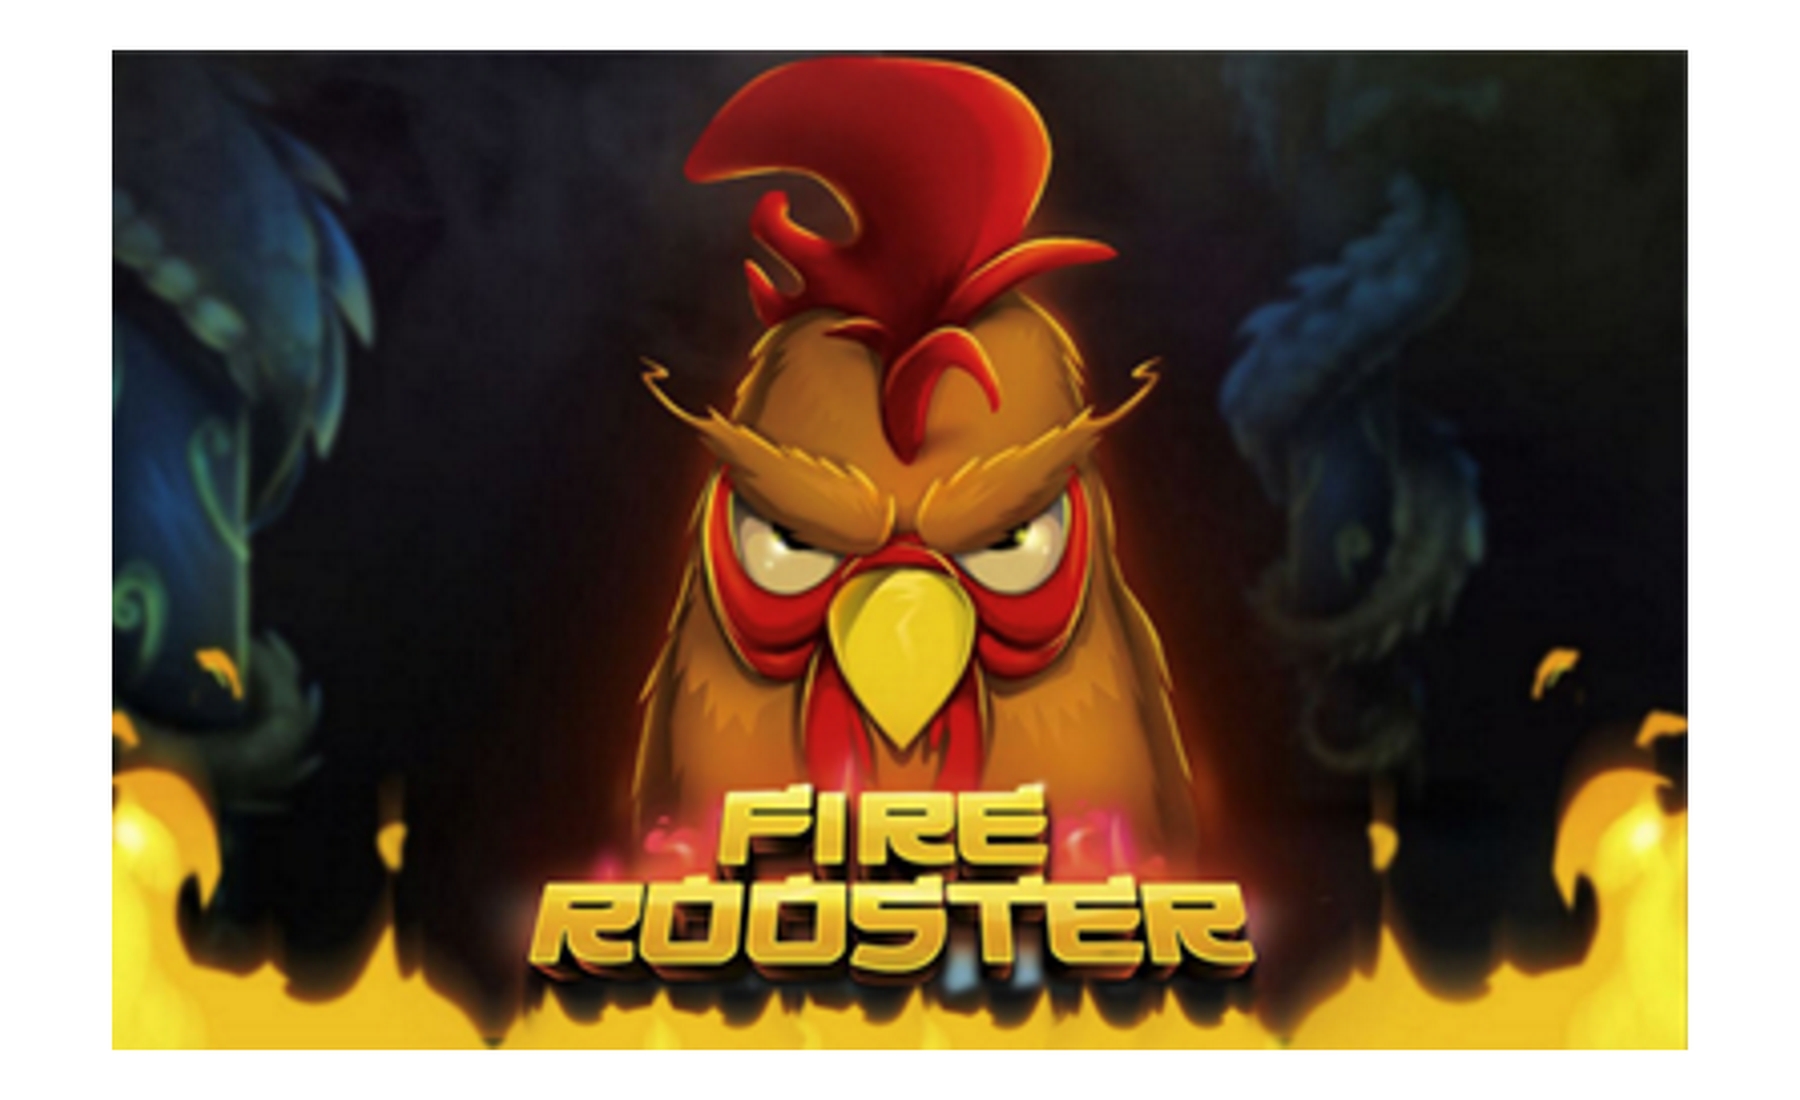 Fire Rooster demo